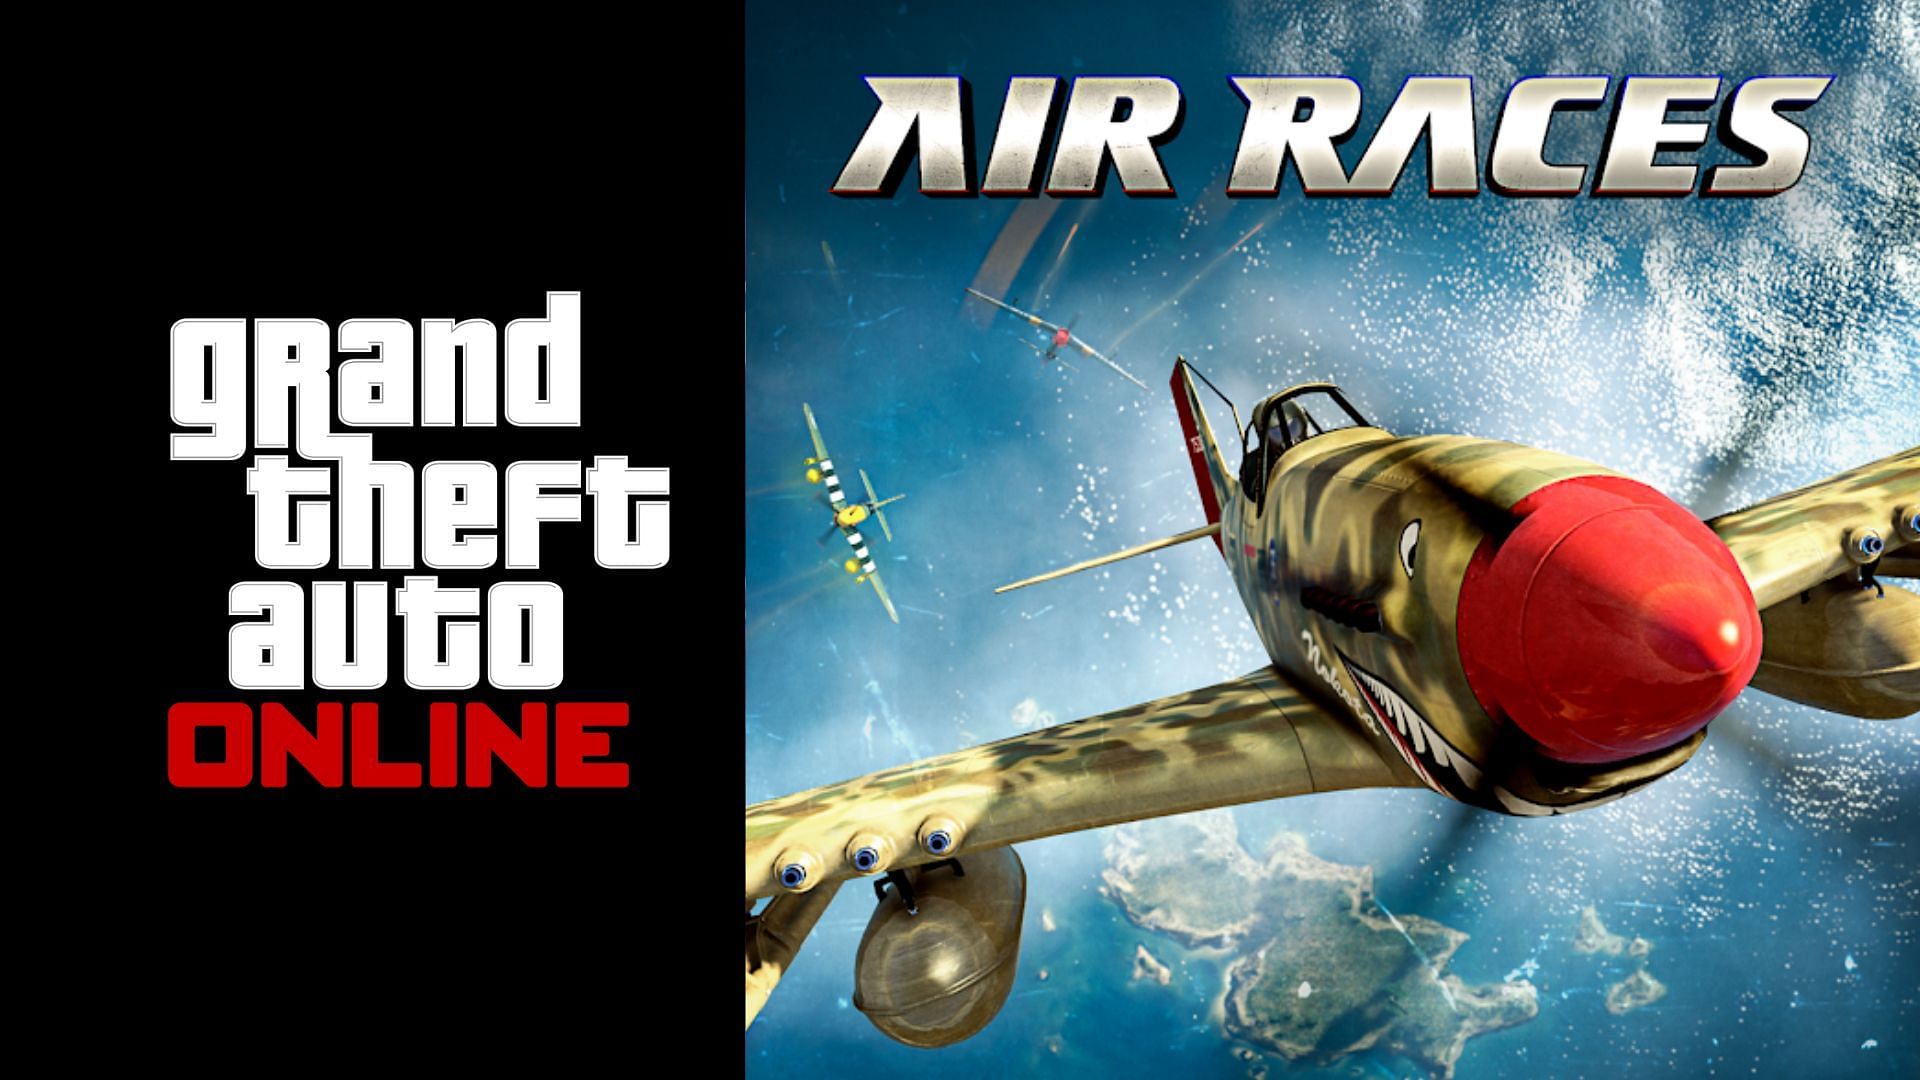 A brief report on the GTA Online Air Races double bonus event which is gong to end soon (Image via Rockstar Games)